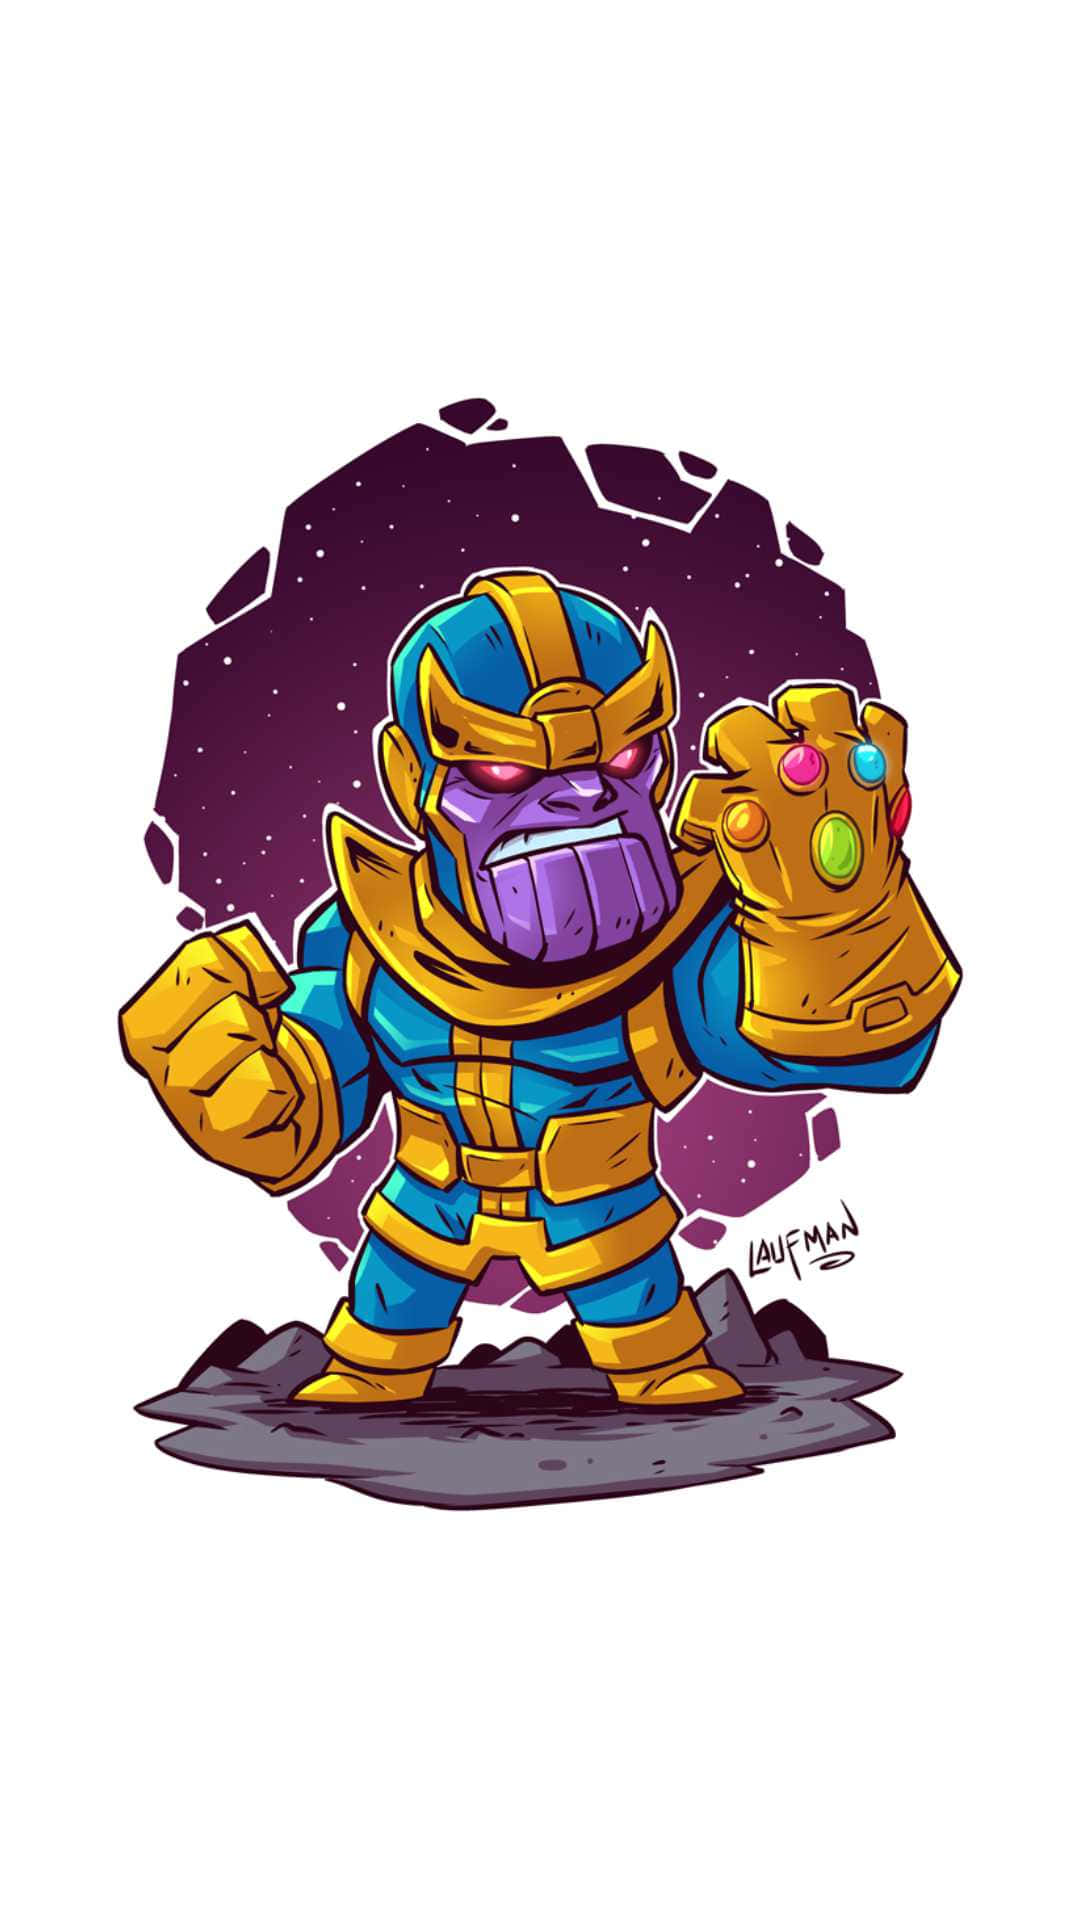 Thanos With Infinity Gauntlet Chibi Marvel Art Iphone Wallpaper